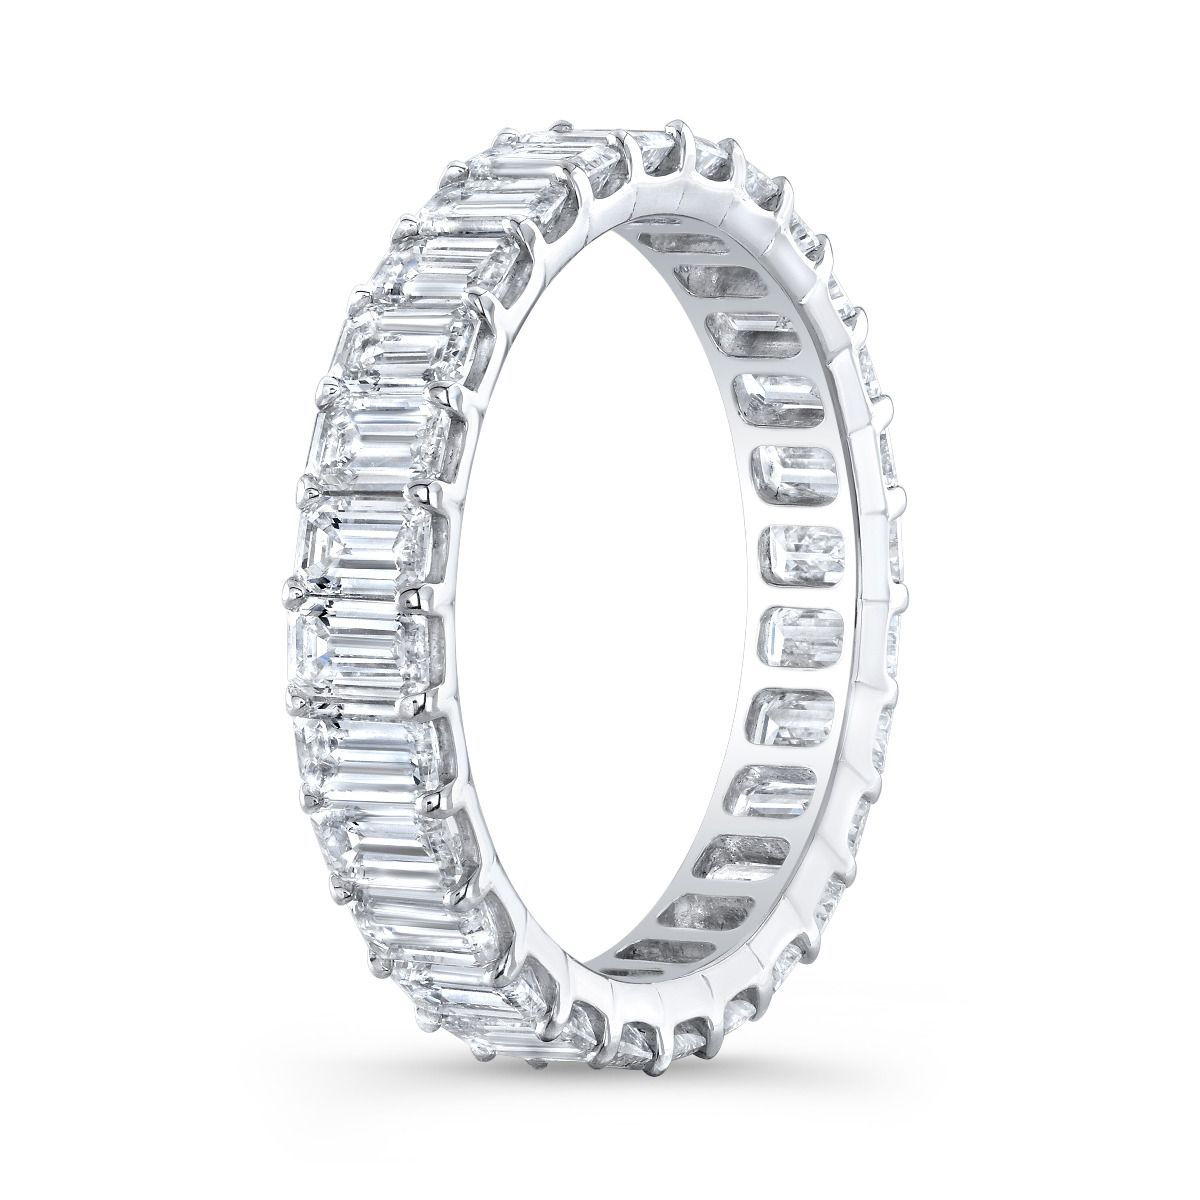 A total of 3 Carats Natural Emerald Eternity Band that is set on this low profile, shared prong design.